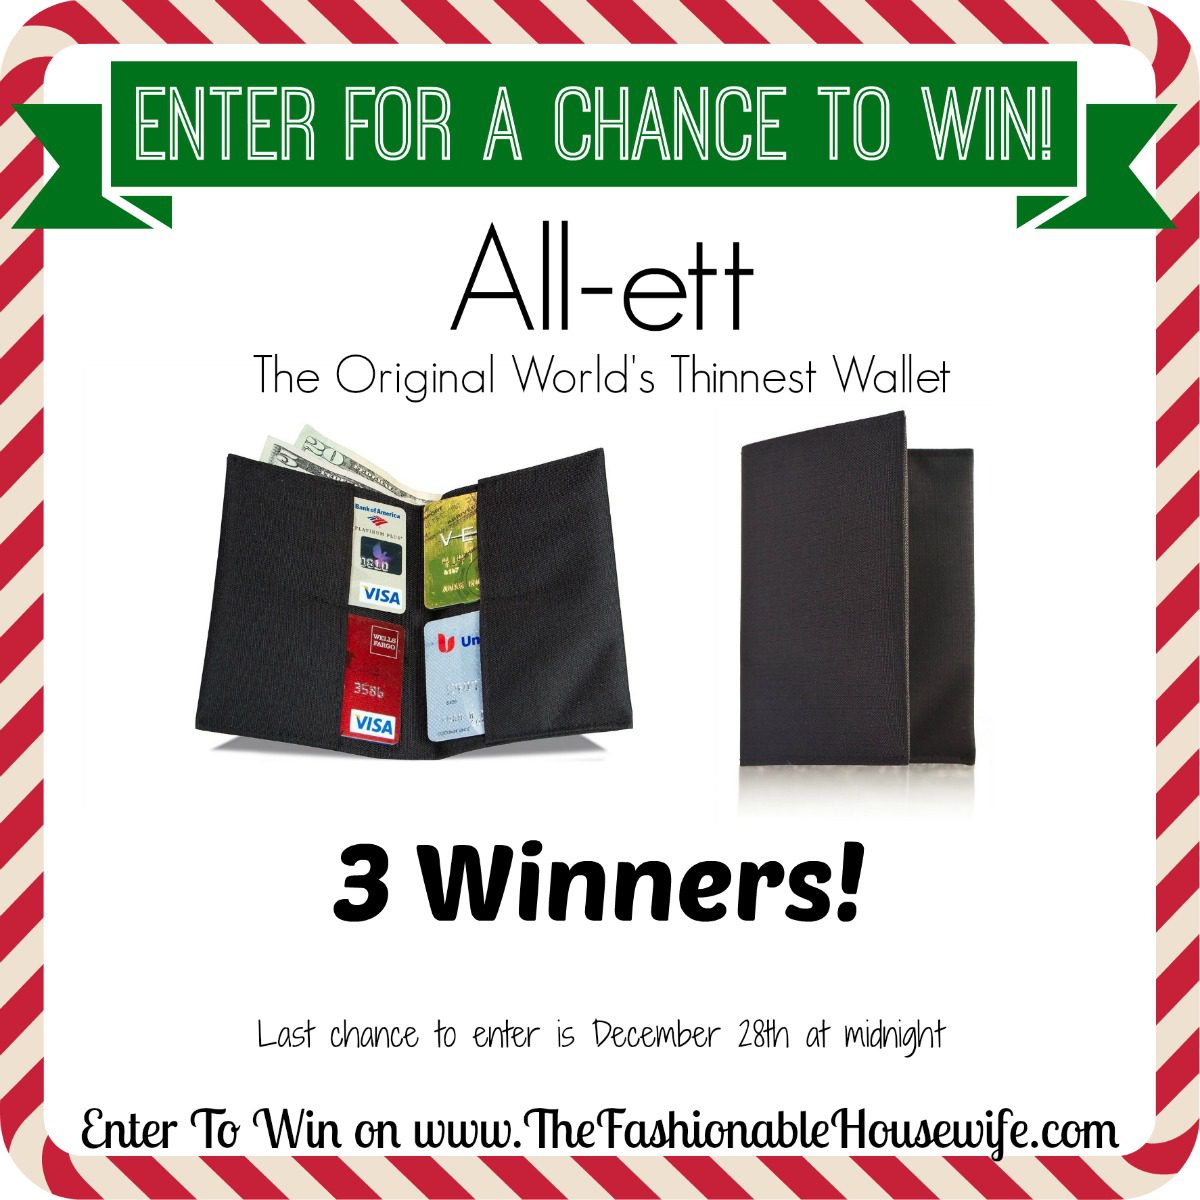 Enter for a chance to win Allett Wallet